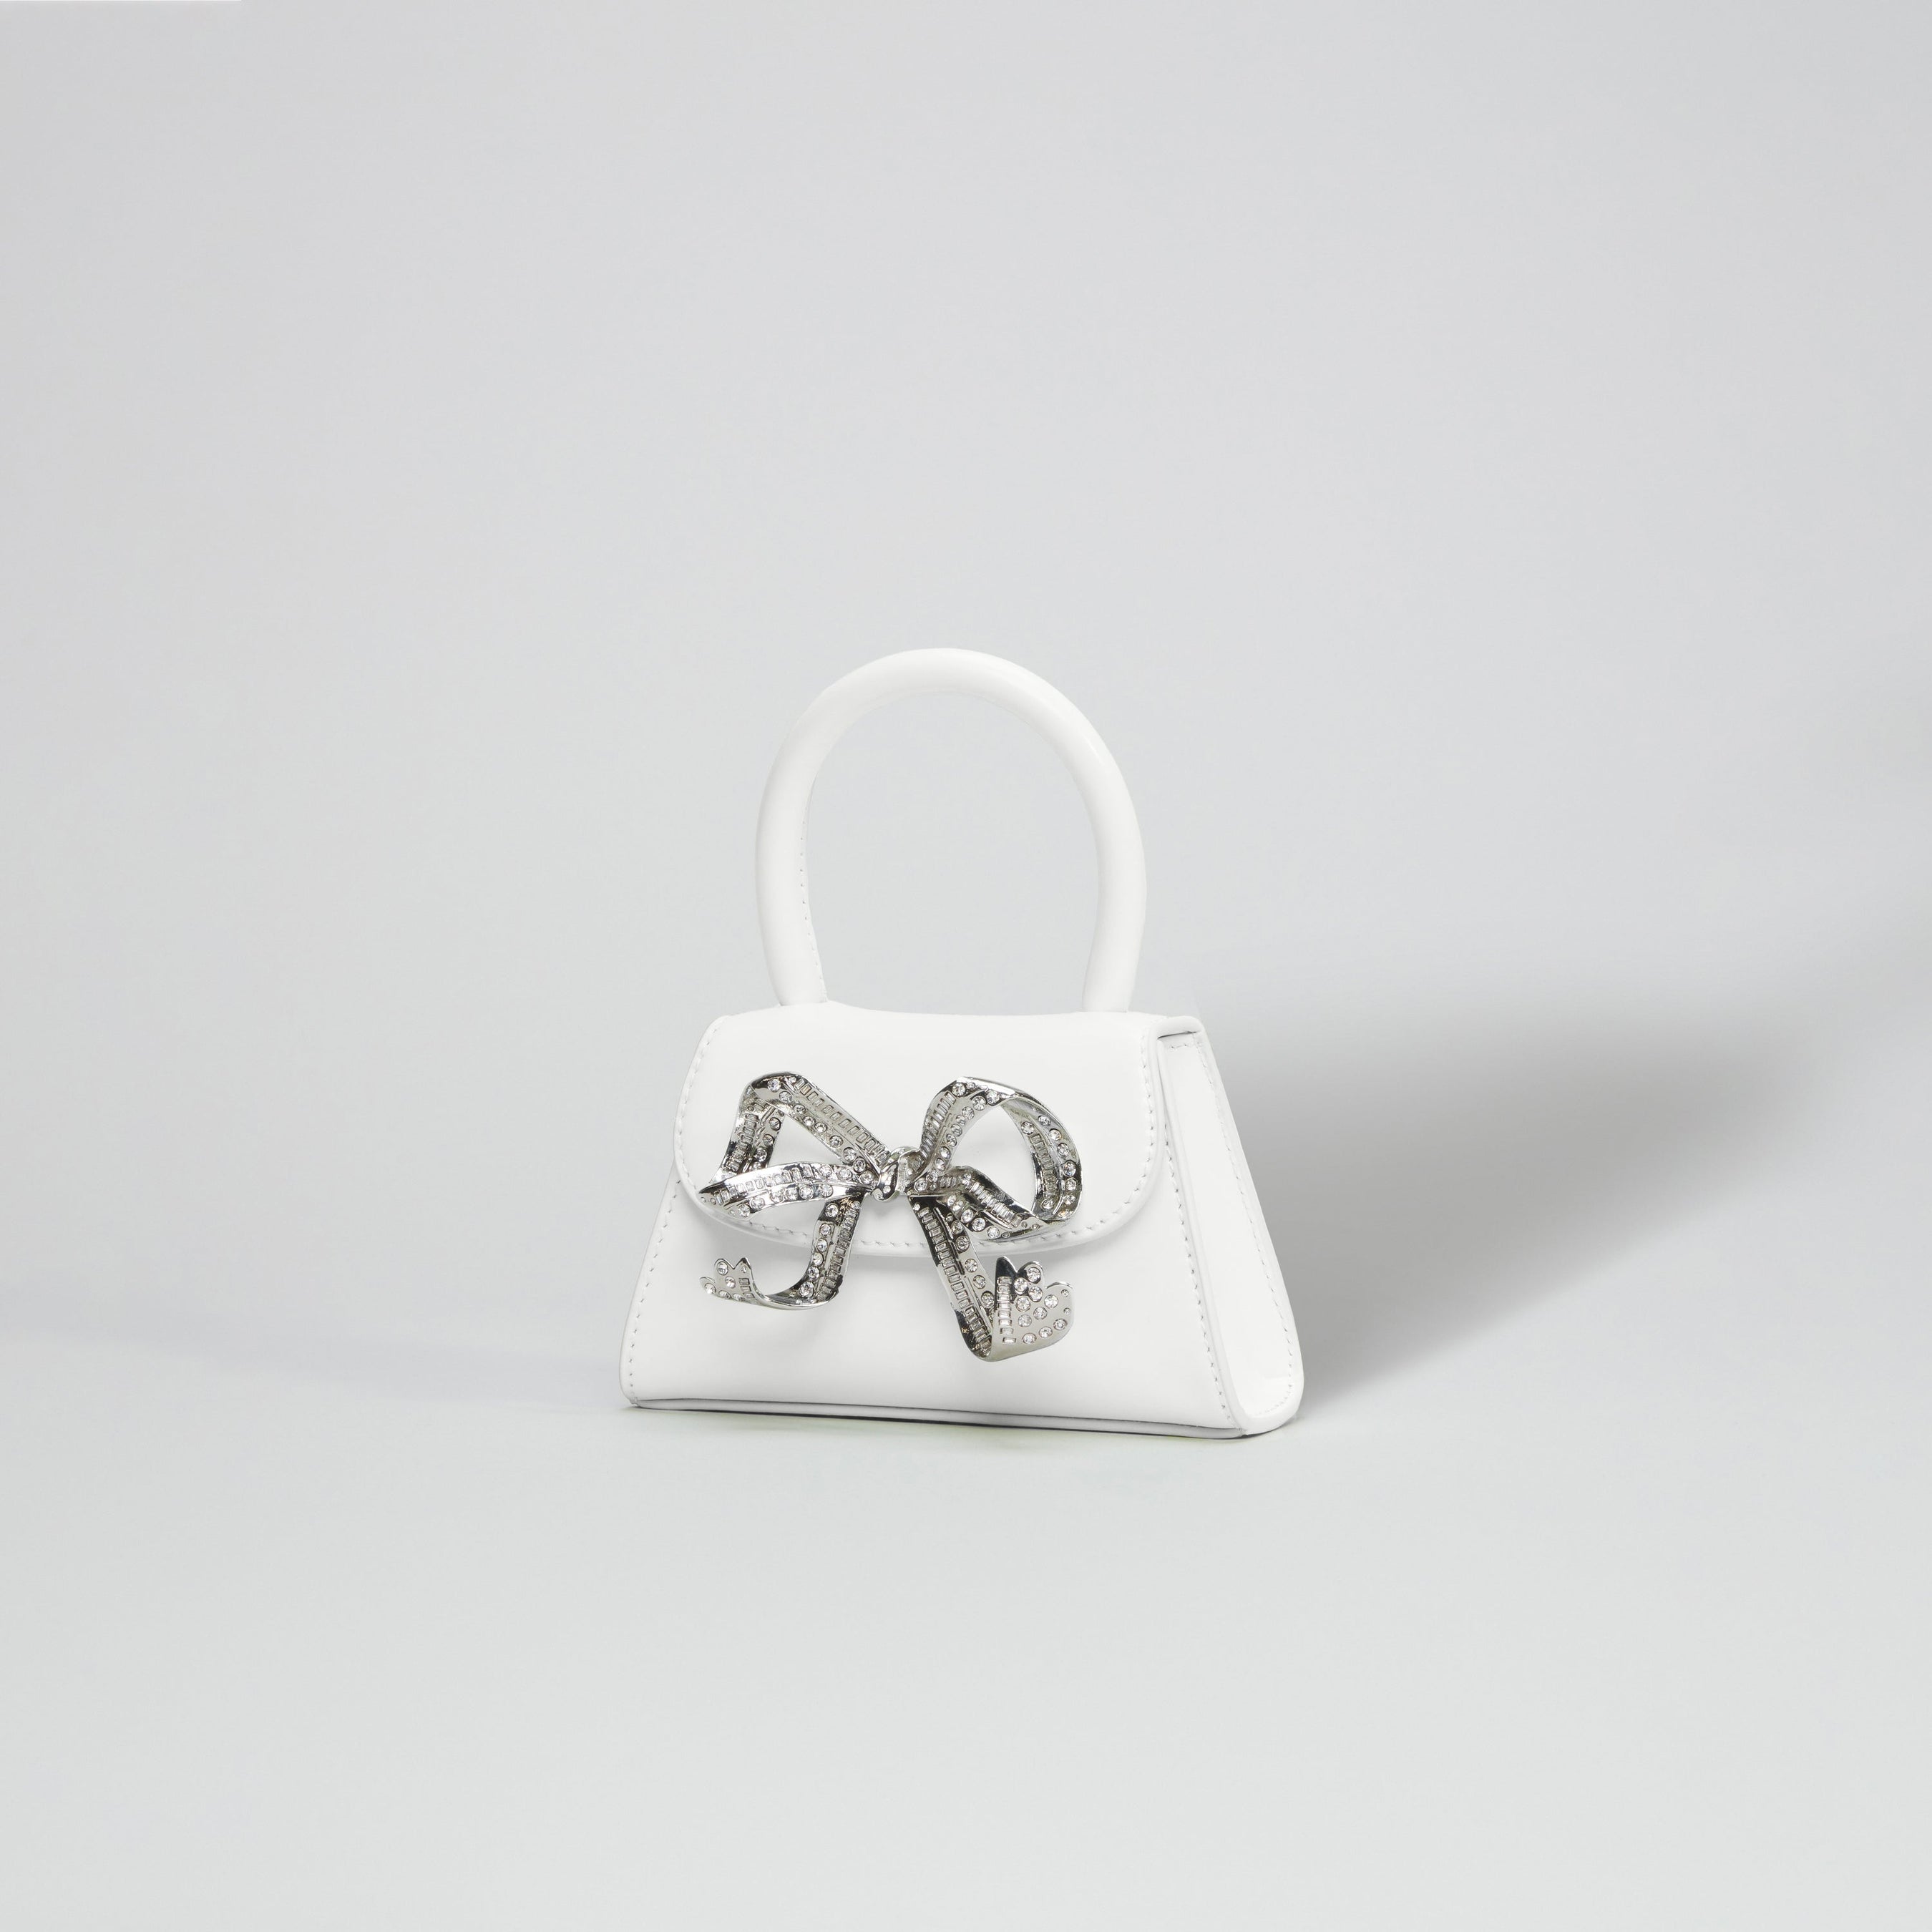 The Bow Micro in White with Diamanté